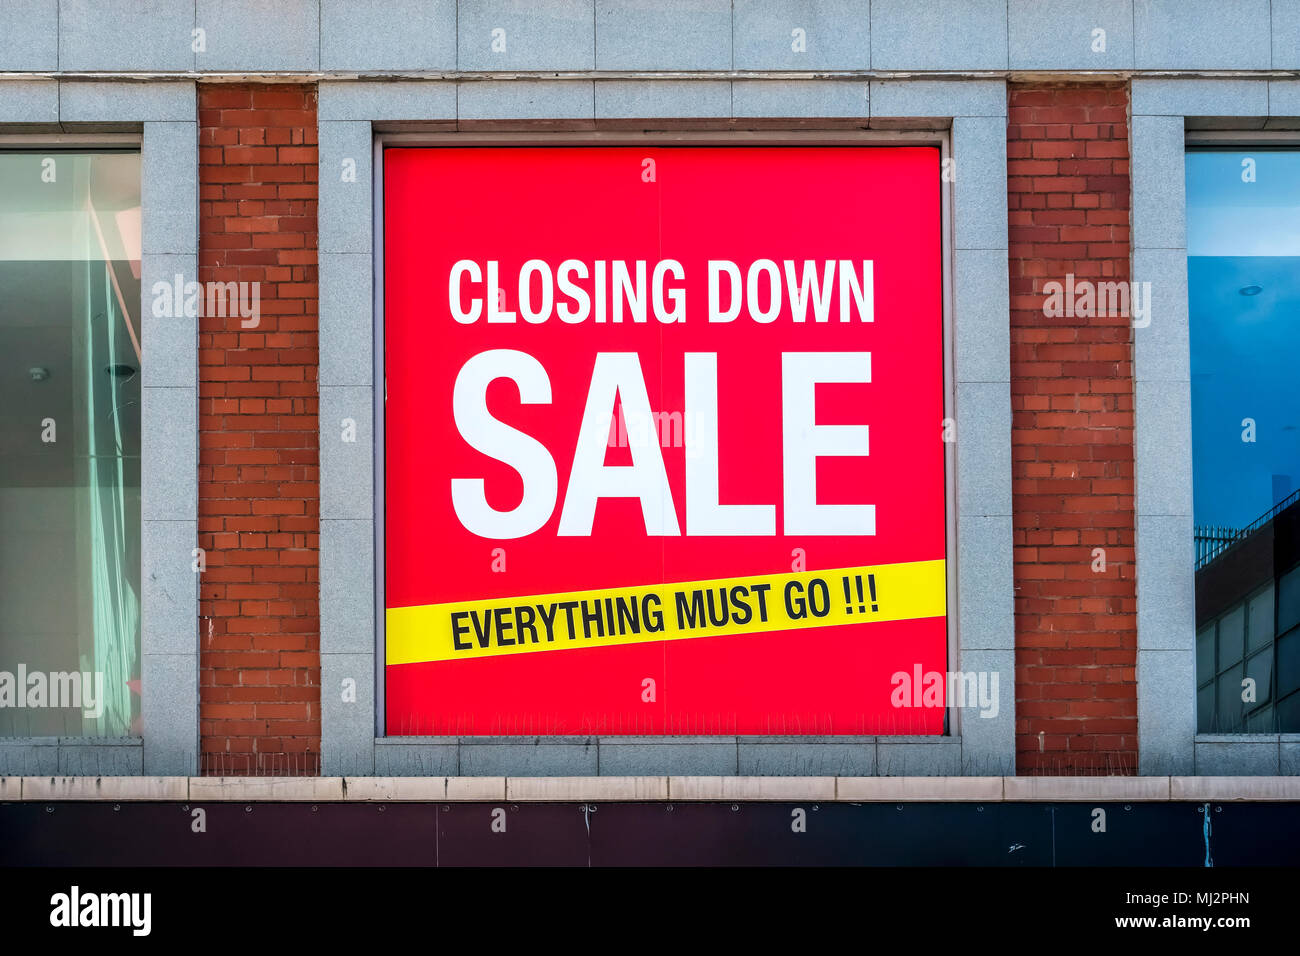 Store closing down sale sign board. Everything must go. Recession concept. Retail shop shutting down. Shopping. Dublin, Ireland, Europe, EU. Close up. Stock Photo